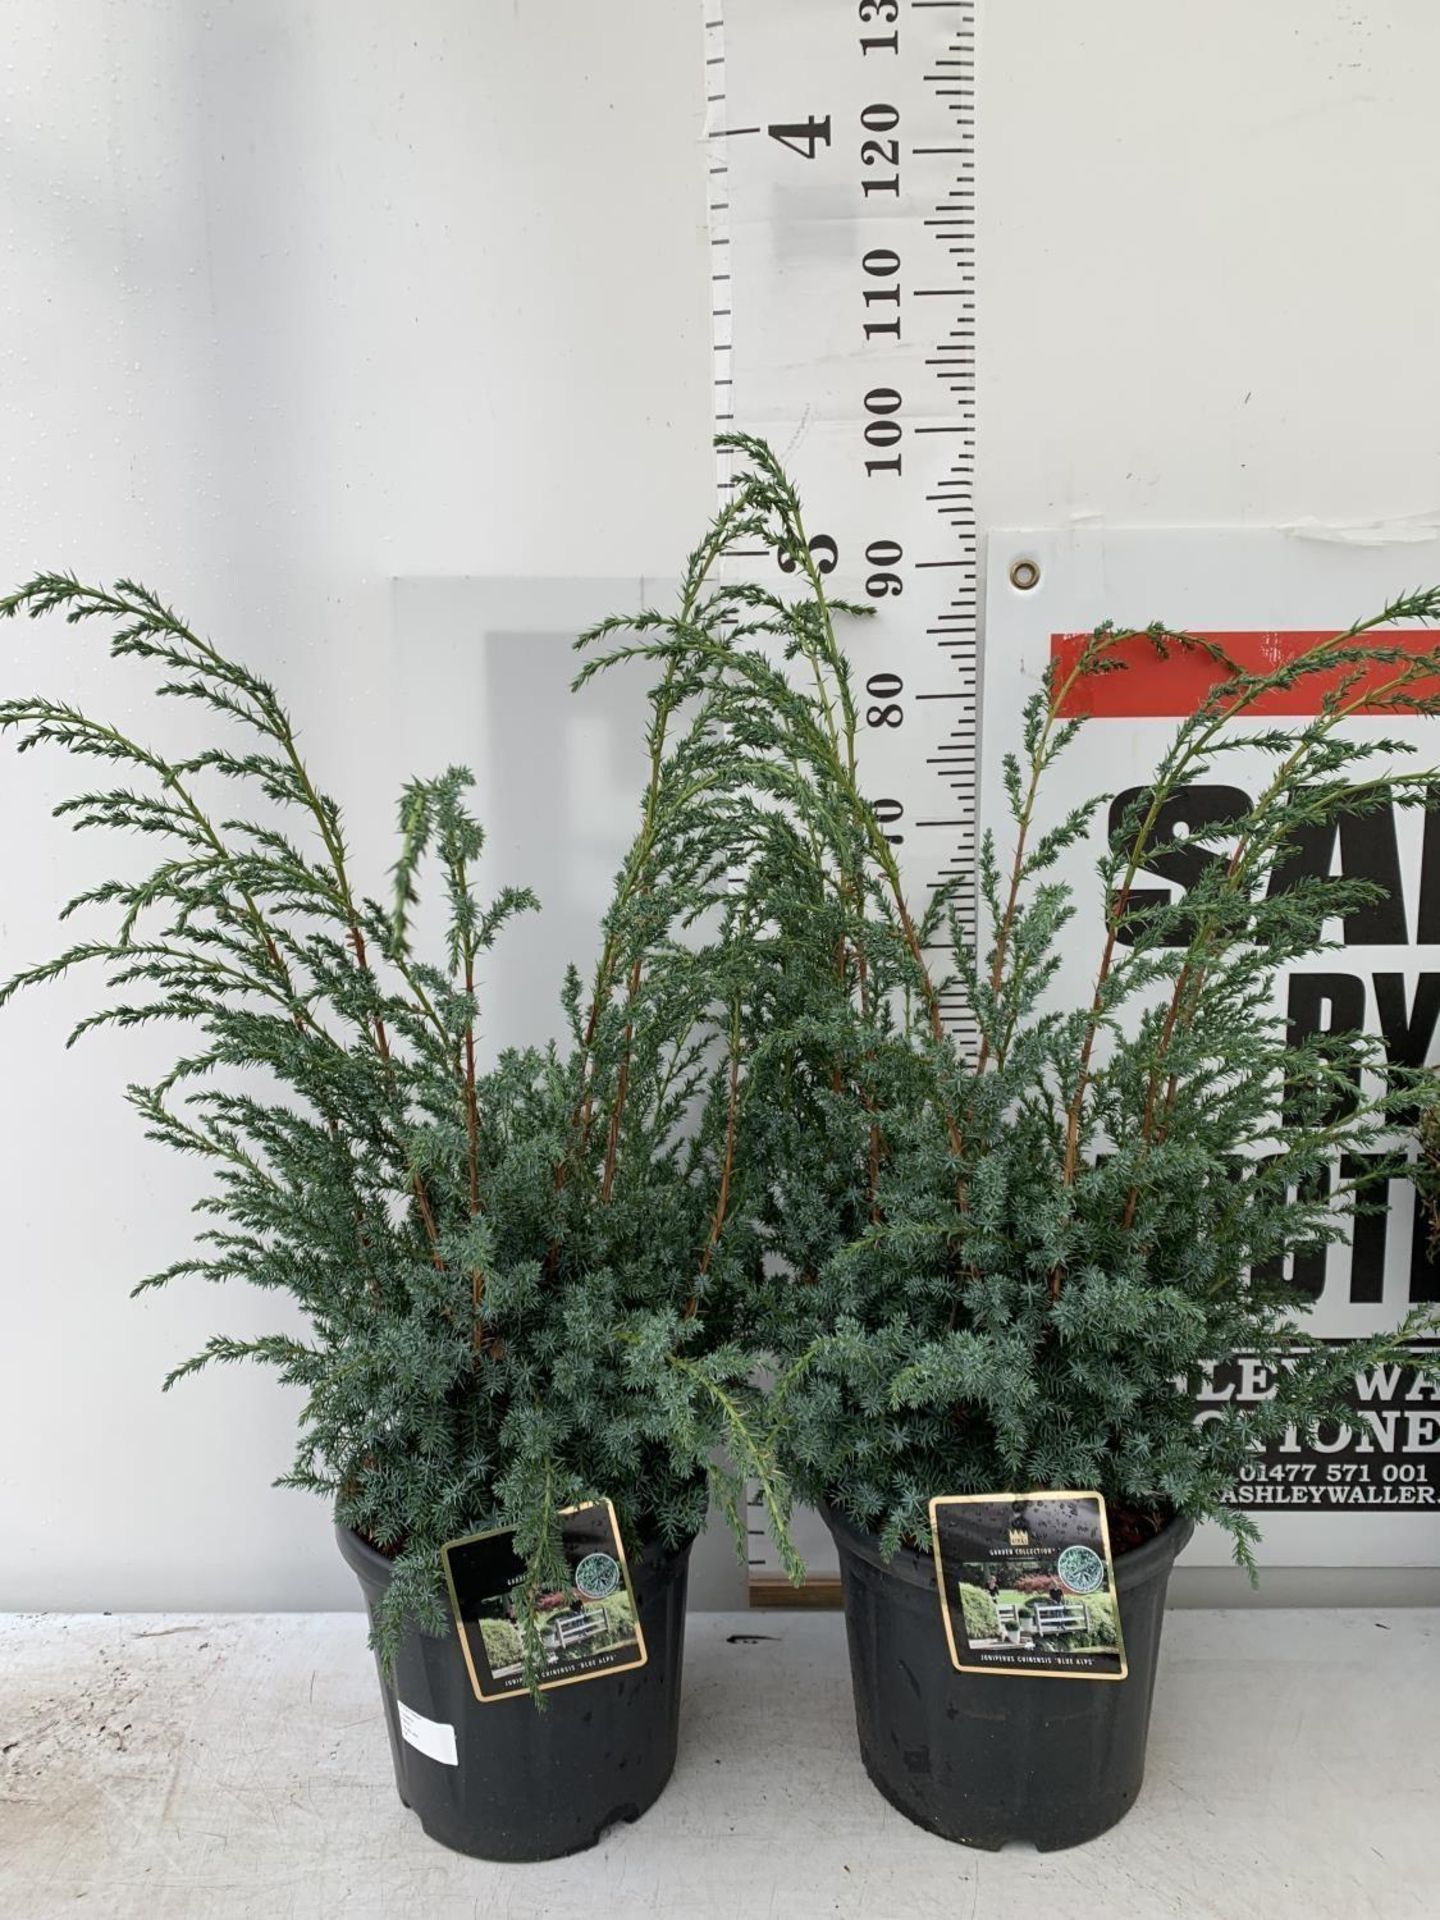 TWO JUNIPERUS CHINENSIS BLUE ALPS IN 7 LTR POTS A METRE IN HEIGHT PLUS VAT TO BE SOLD FOR THE TWO - Image 12 of 22